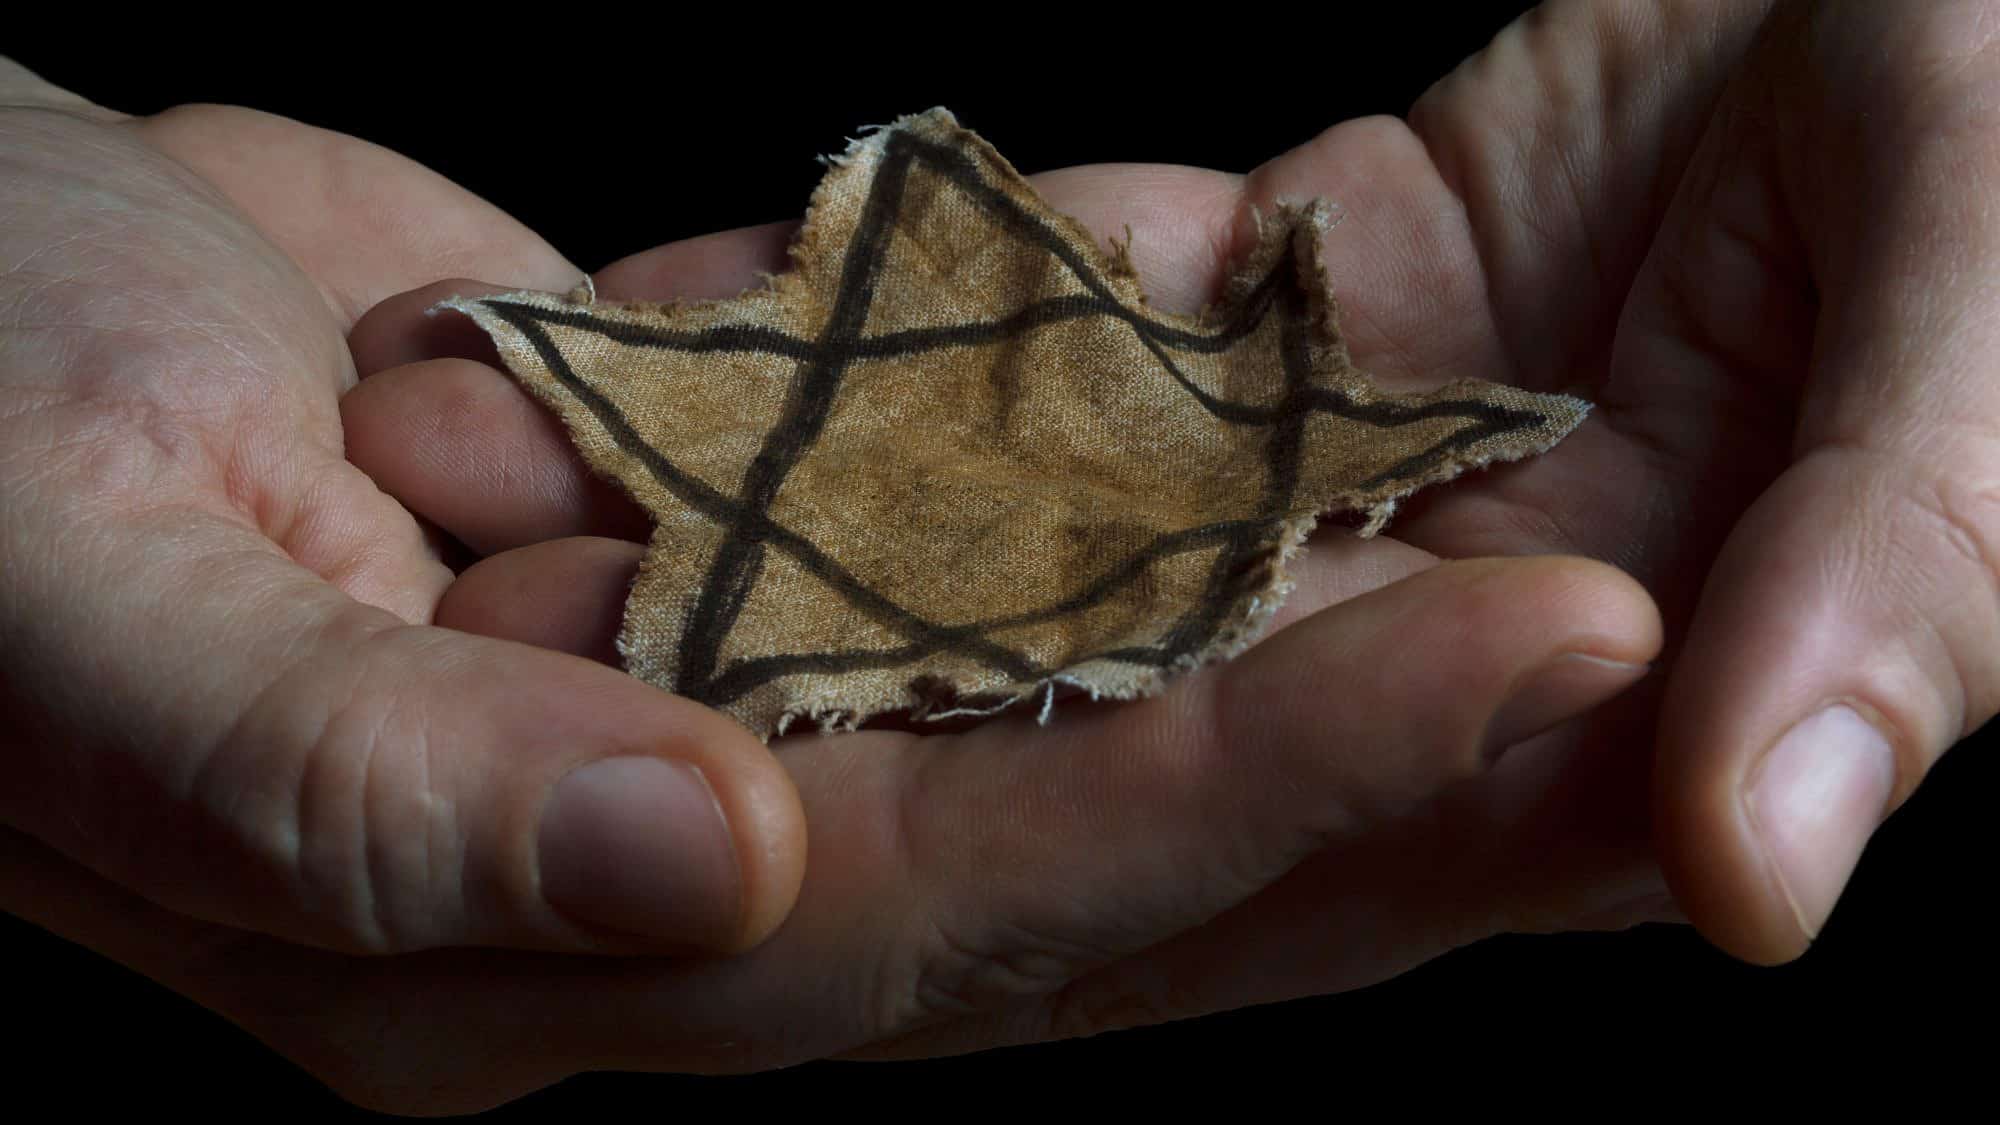 A close-up of a Jewish star, or Magen David, from the years of World War II and the Holocaust. Credit: Sandra Matic/Shutterstock.